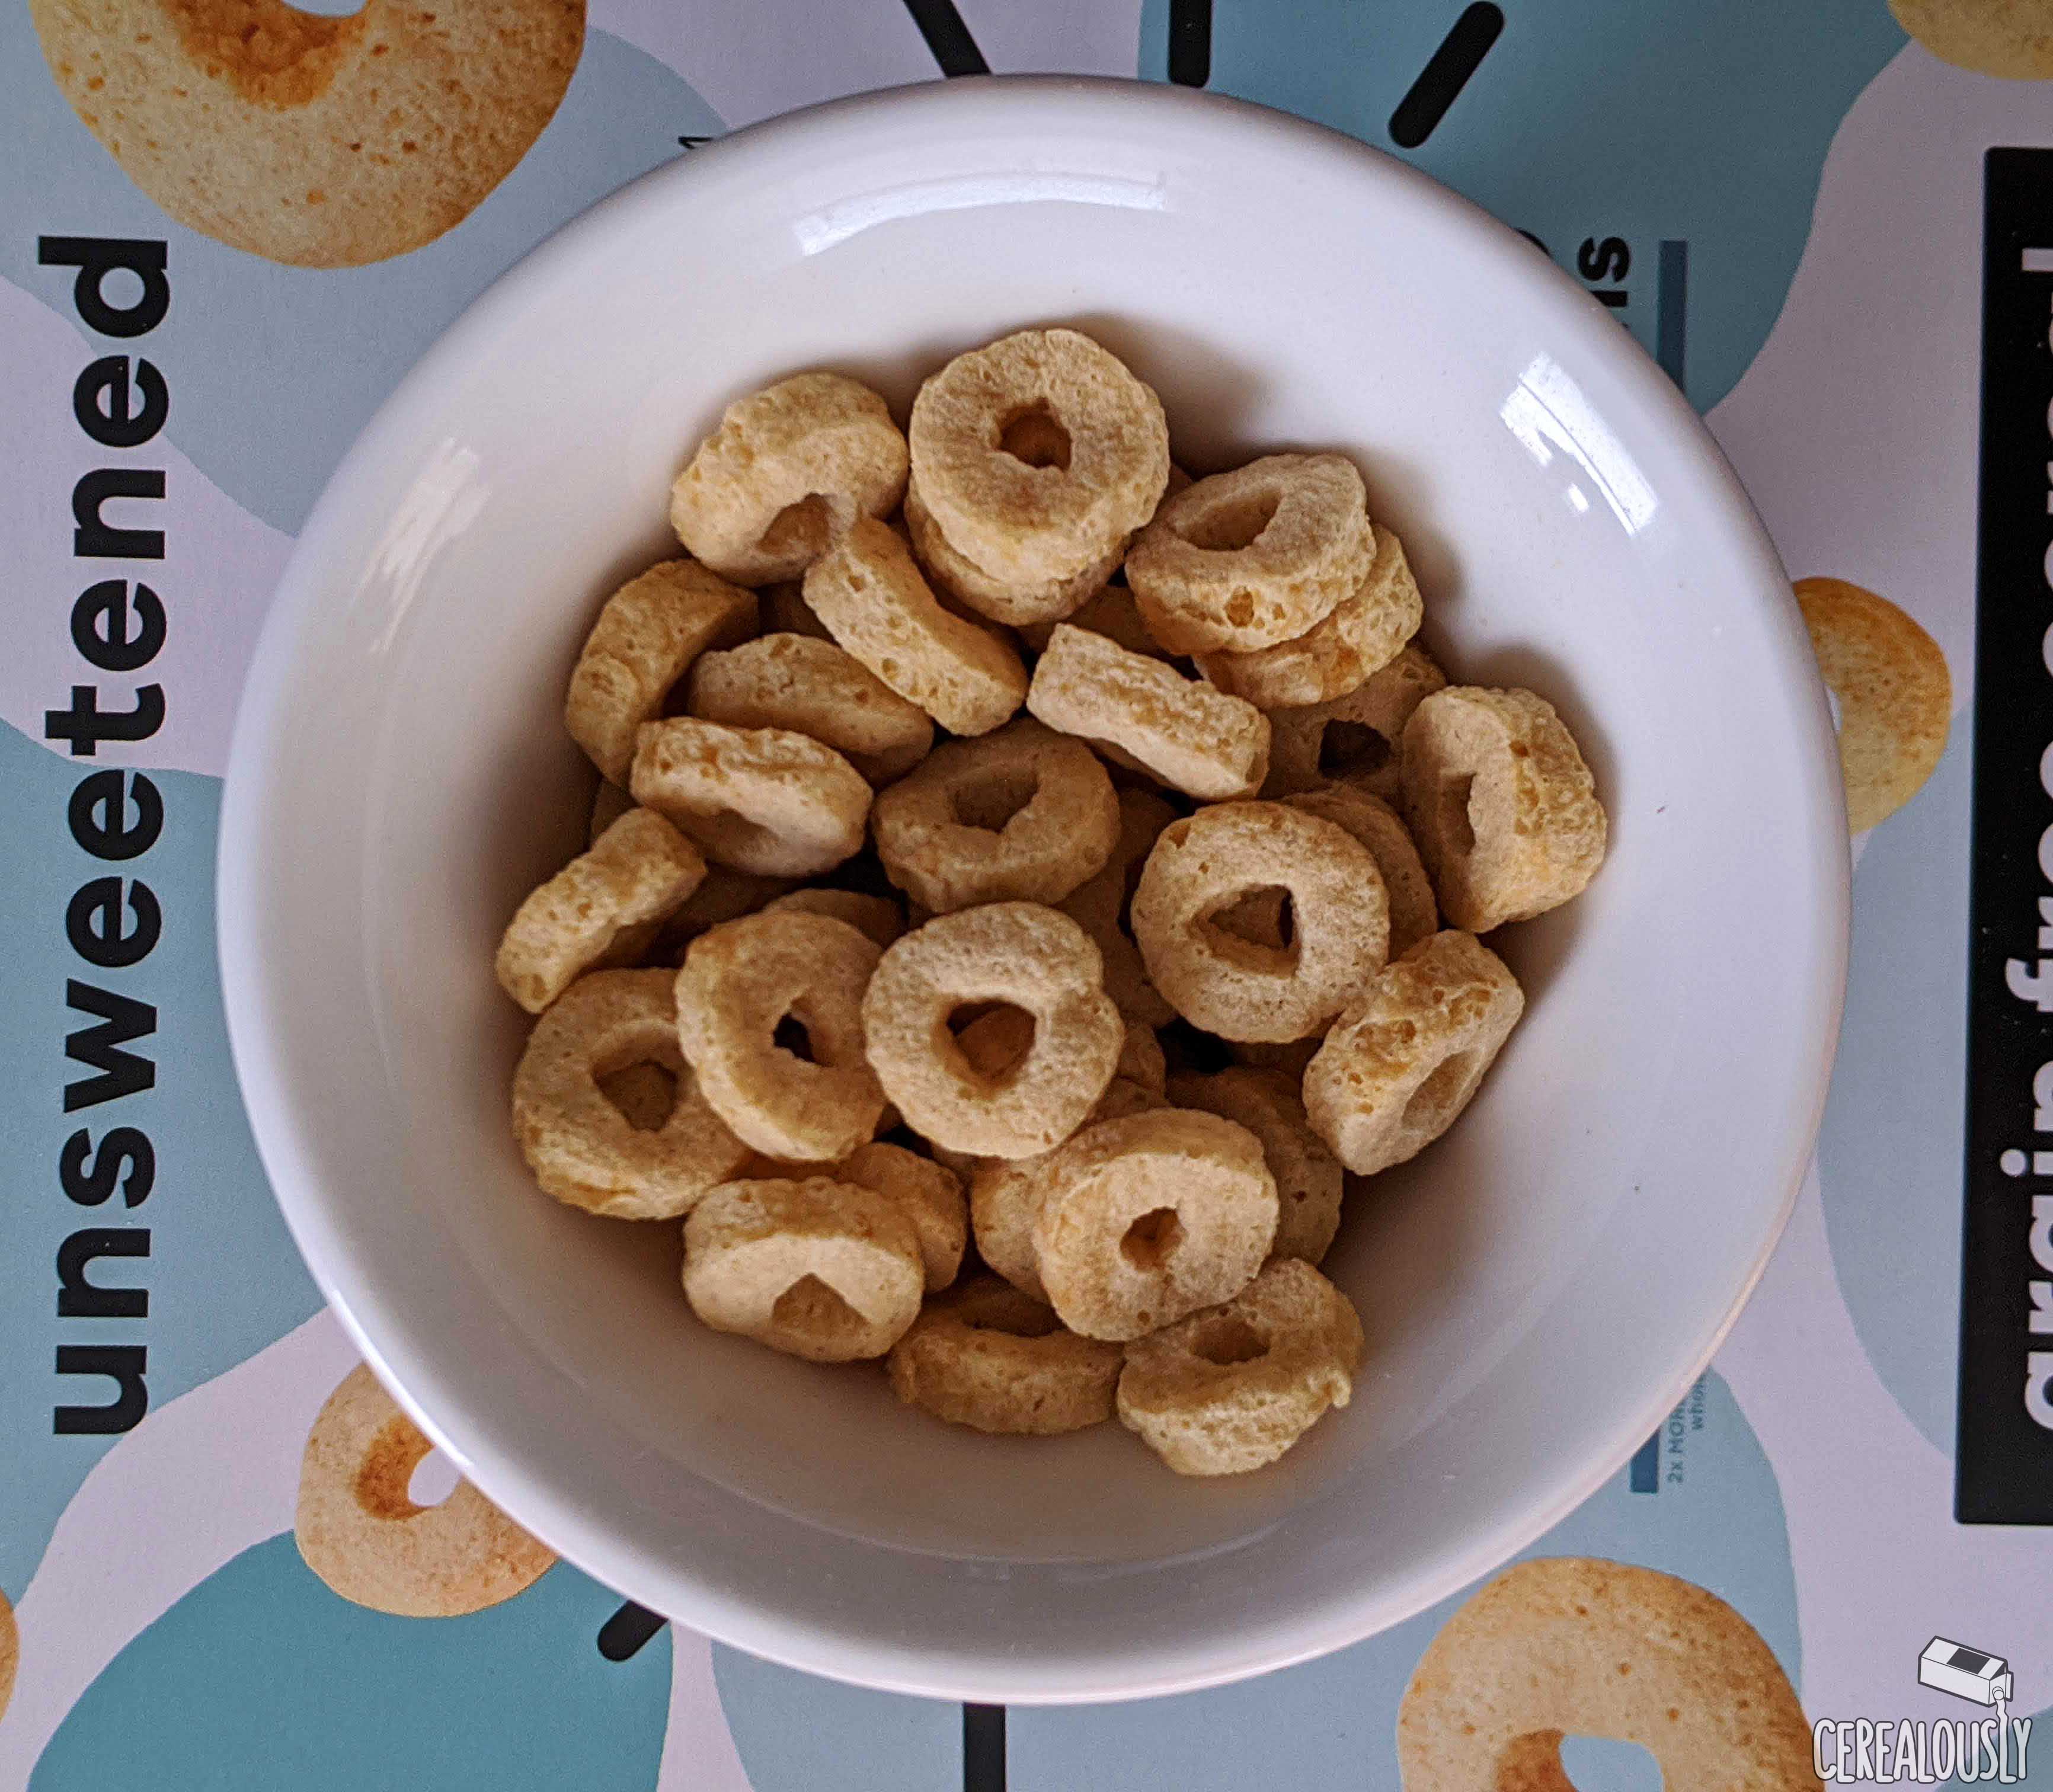 https://www.cerealously.net/wp-content/uploads/2019/12/grain-free-three-wishes-cereal-review-unsweetene.jpg